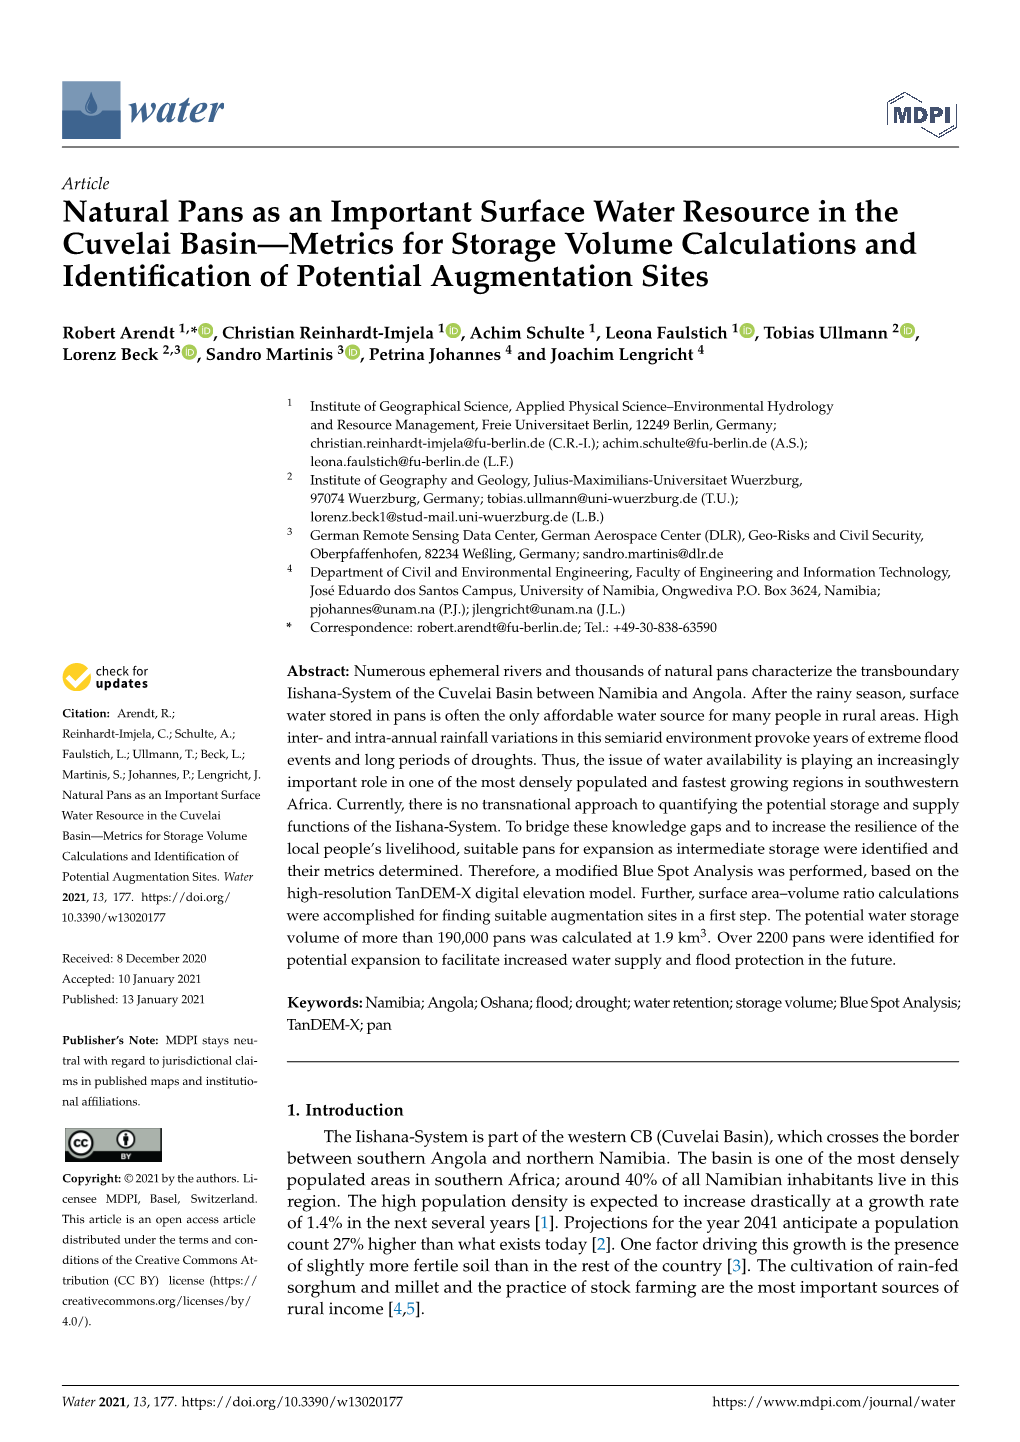 Natural Pans As an Important Surface Water Resource in the Cuvelai Basin—Metrics for Storage Volume Calculations and Identiﬁcation of Potential Augmentation Sites